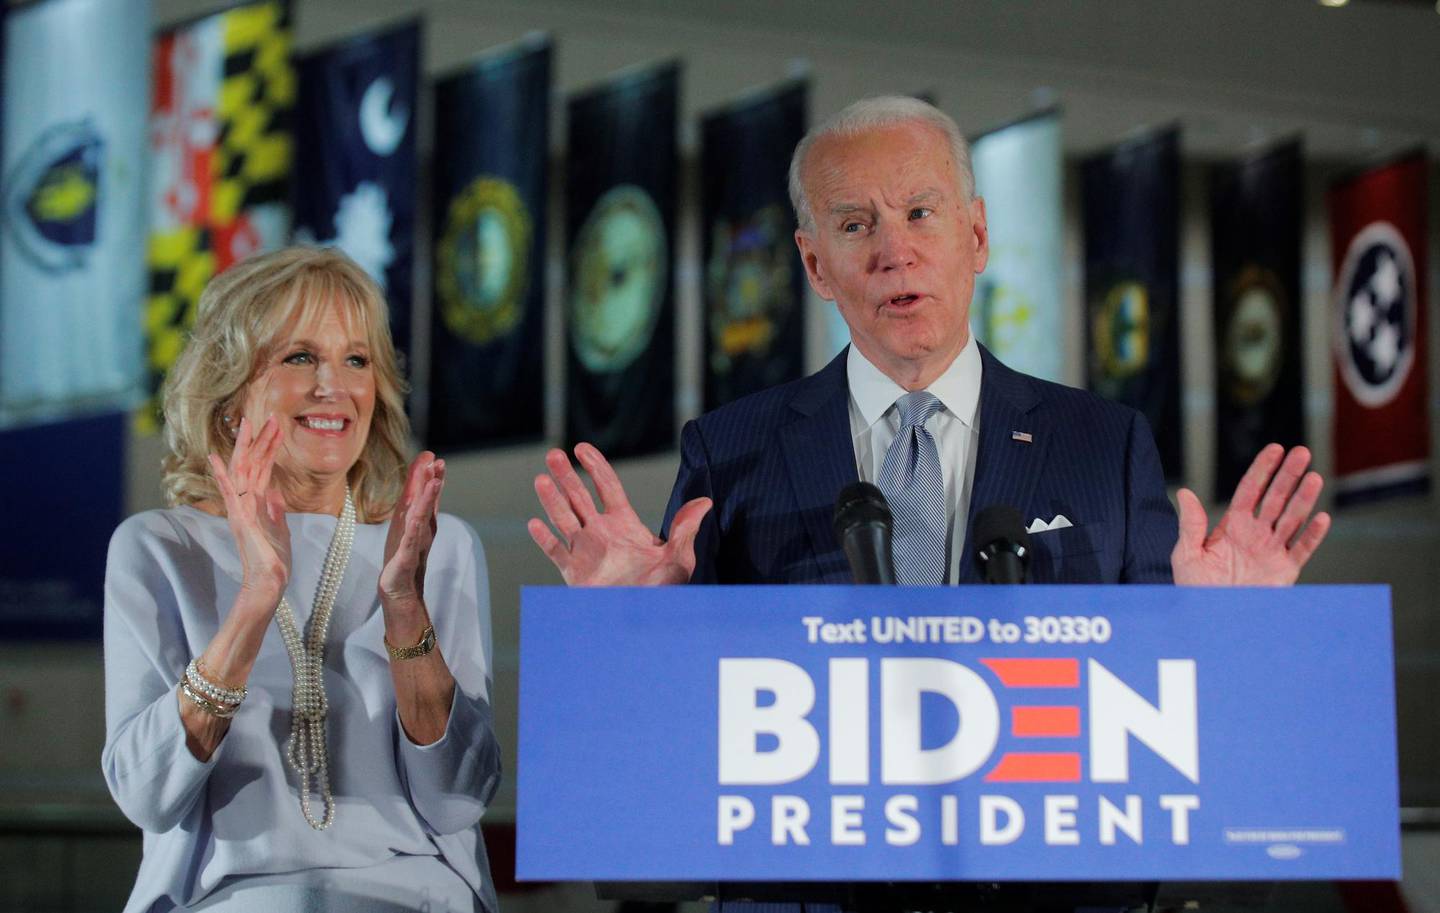 Democratic U.S. presidential candidate and former Vice President Joe Biden speaks with his wife Jill at his side during a primary night speech at The National Constitution Center in Philadelphia, Pennsylvania, U.S., March 10, 2020. REUTERS/Brendan McDermid